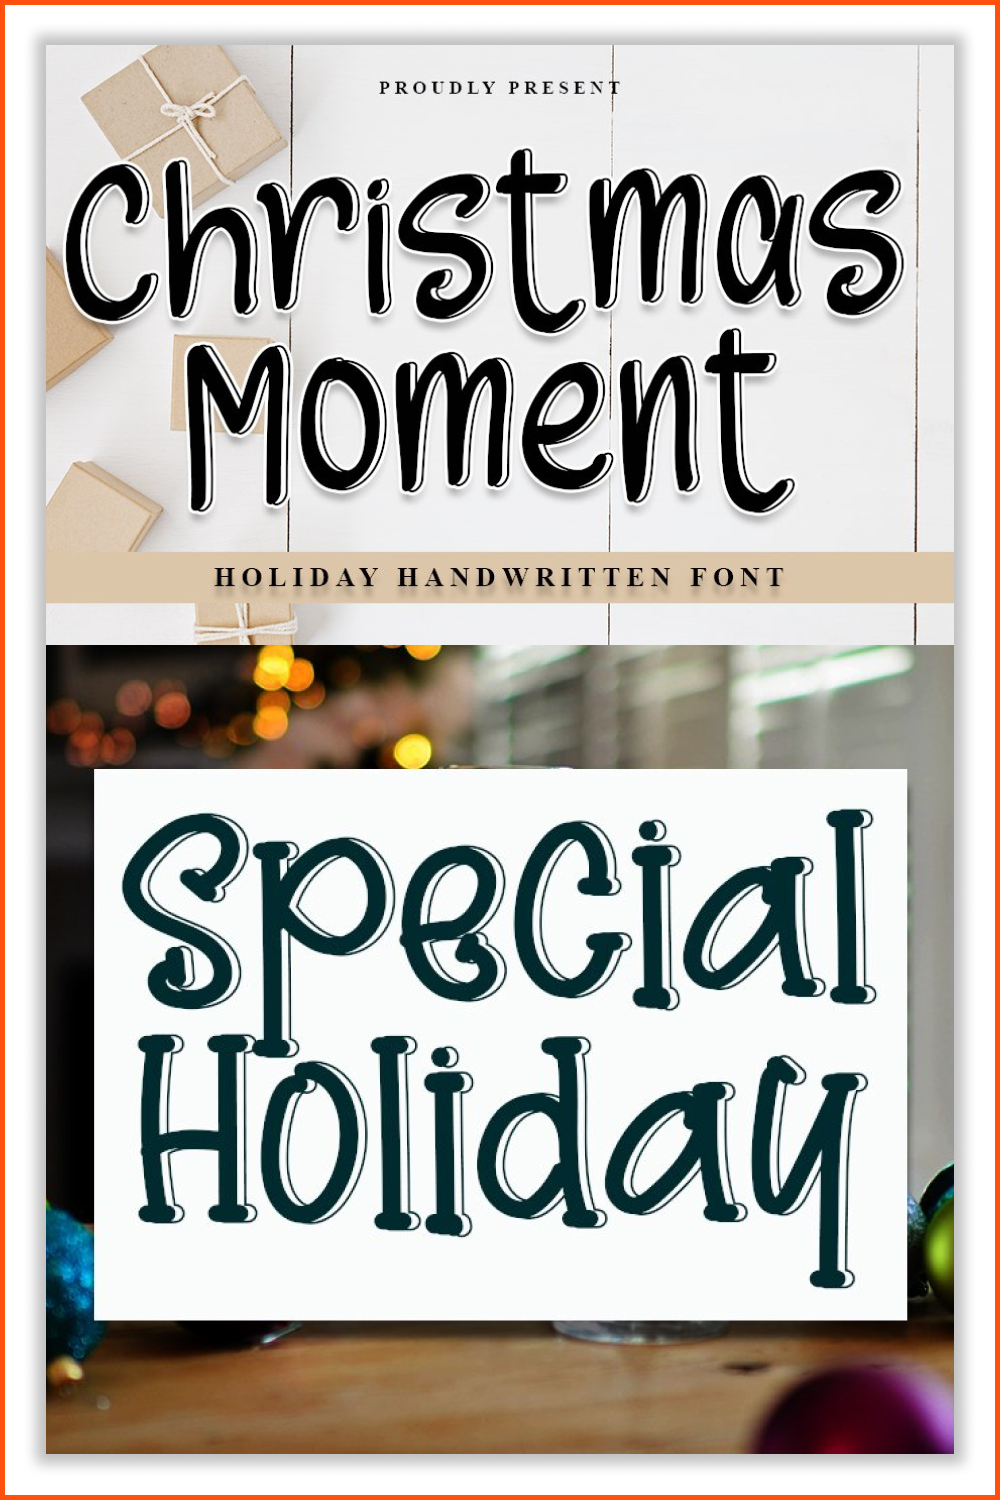 An example of the font Christmas Moments on the poster on the window.